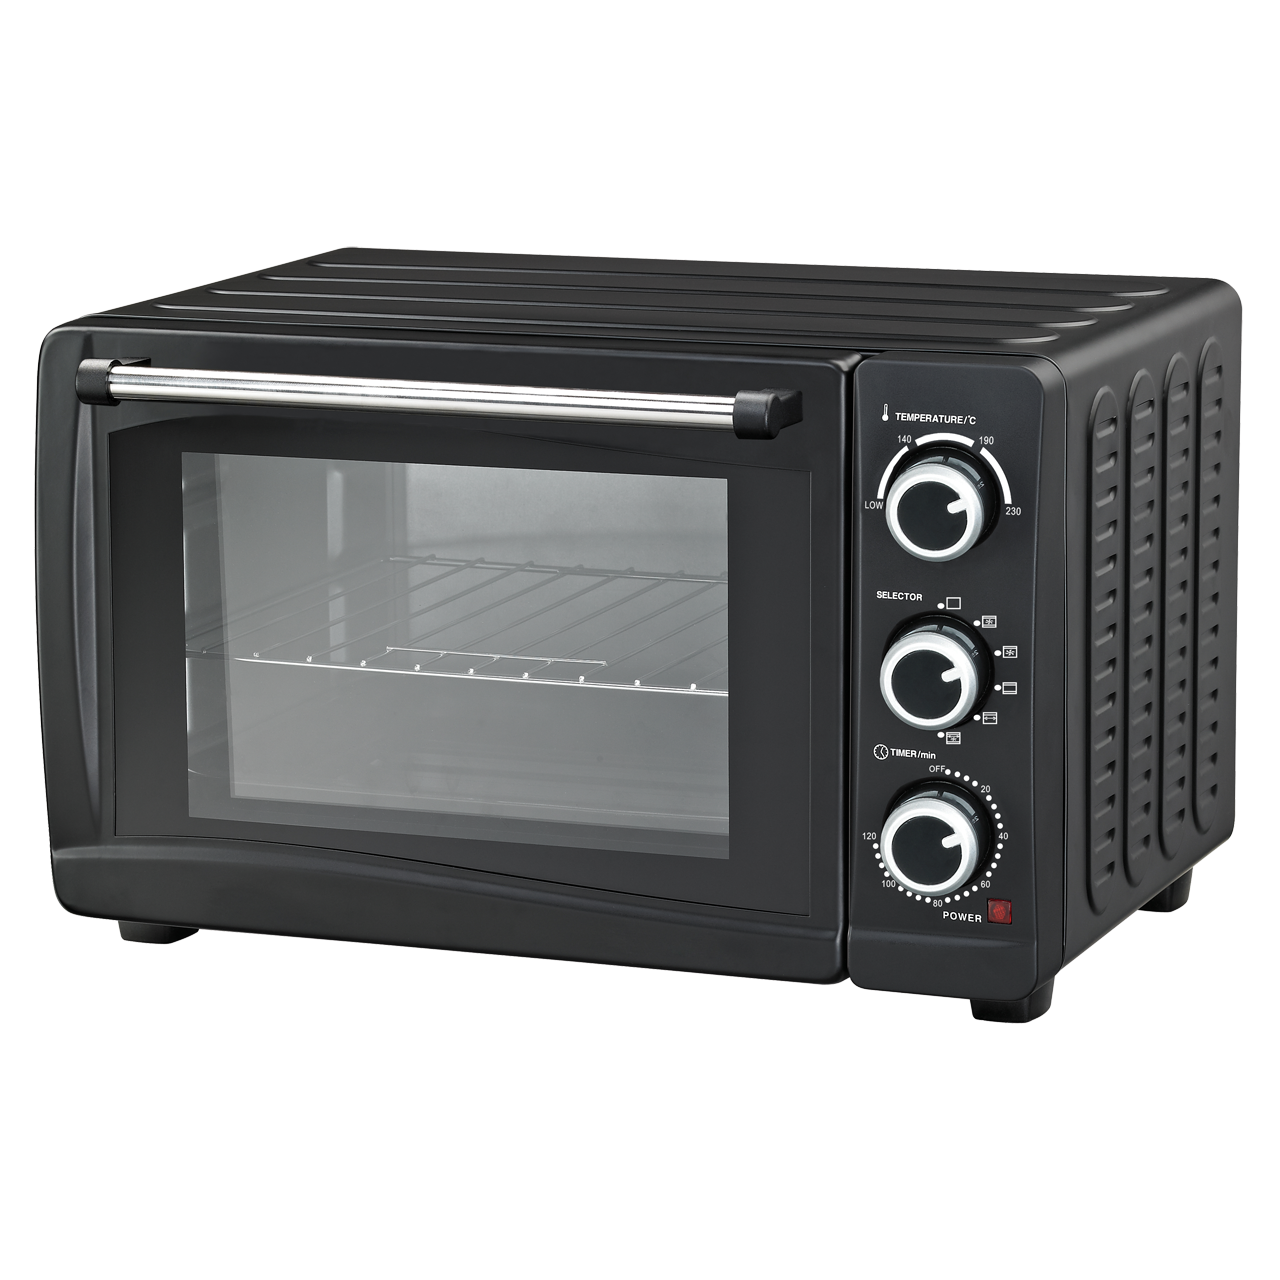 Toaster ovens